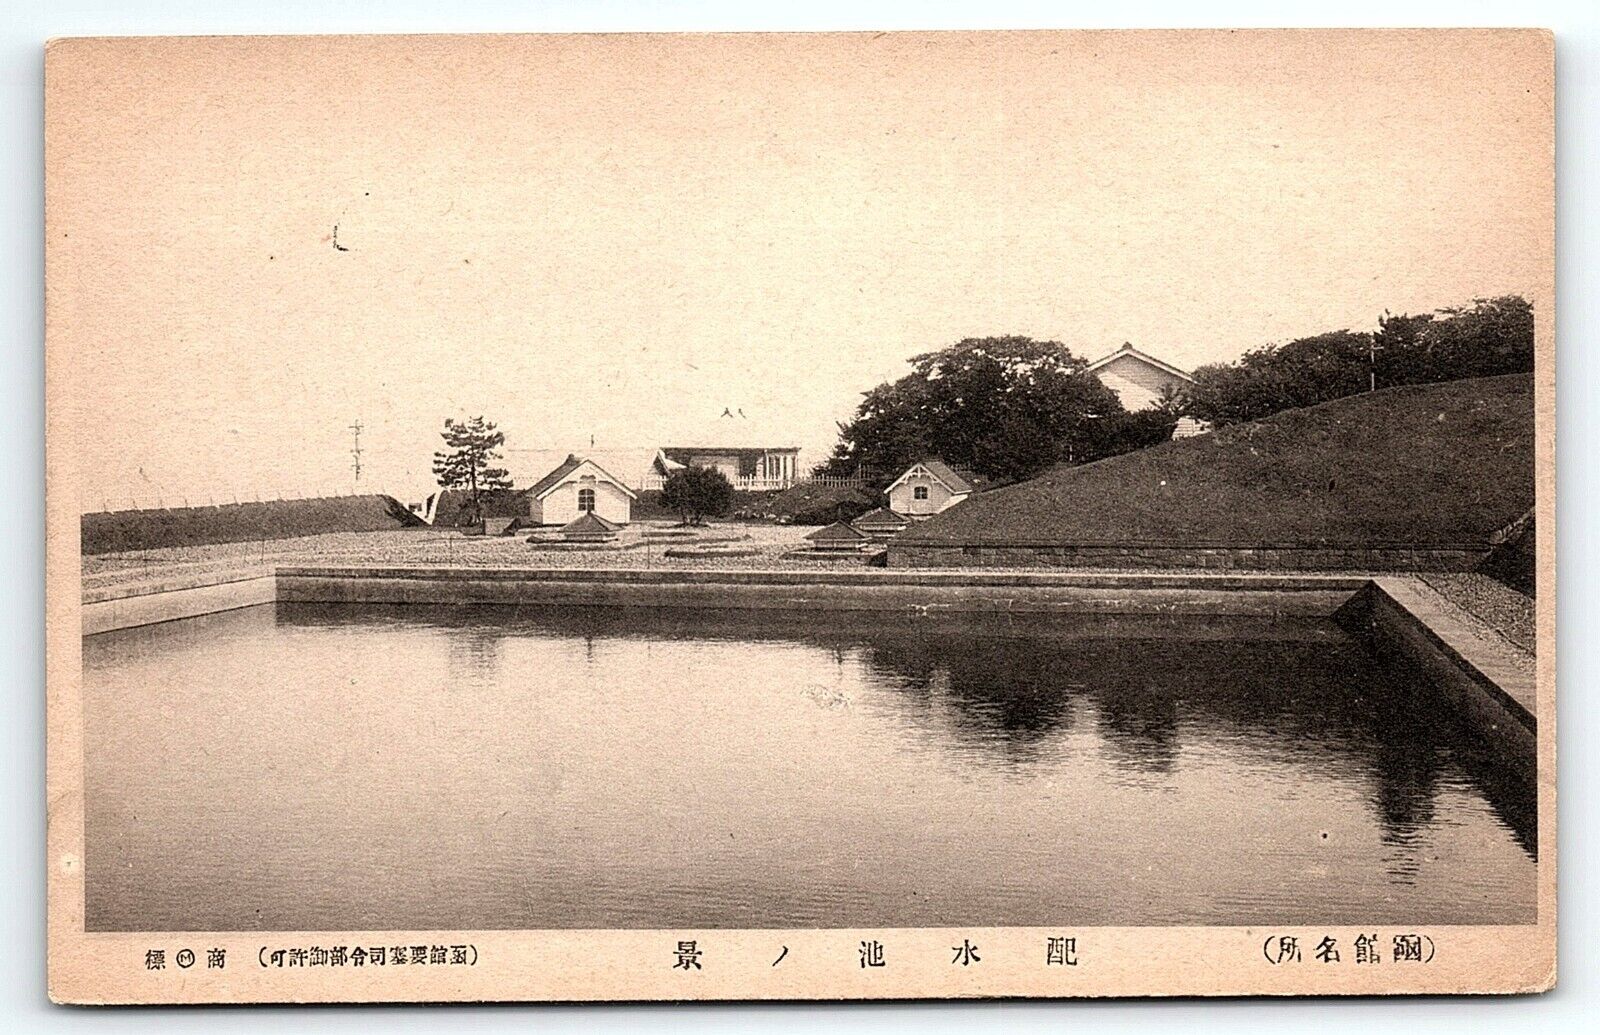 c1910 JAPAN WATER HOMES TEXT IN JAPANESE INTERESTING POSTCARD 46-142